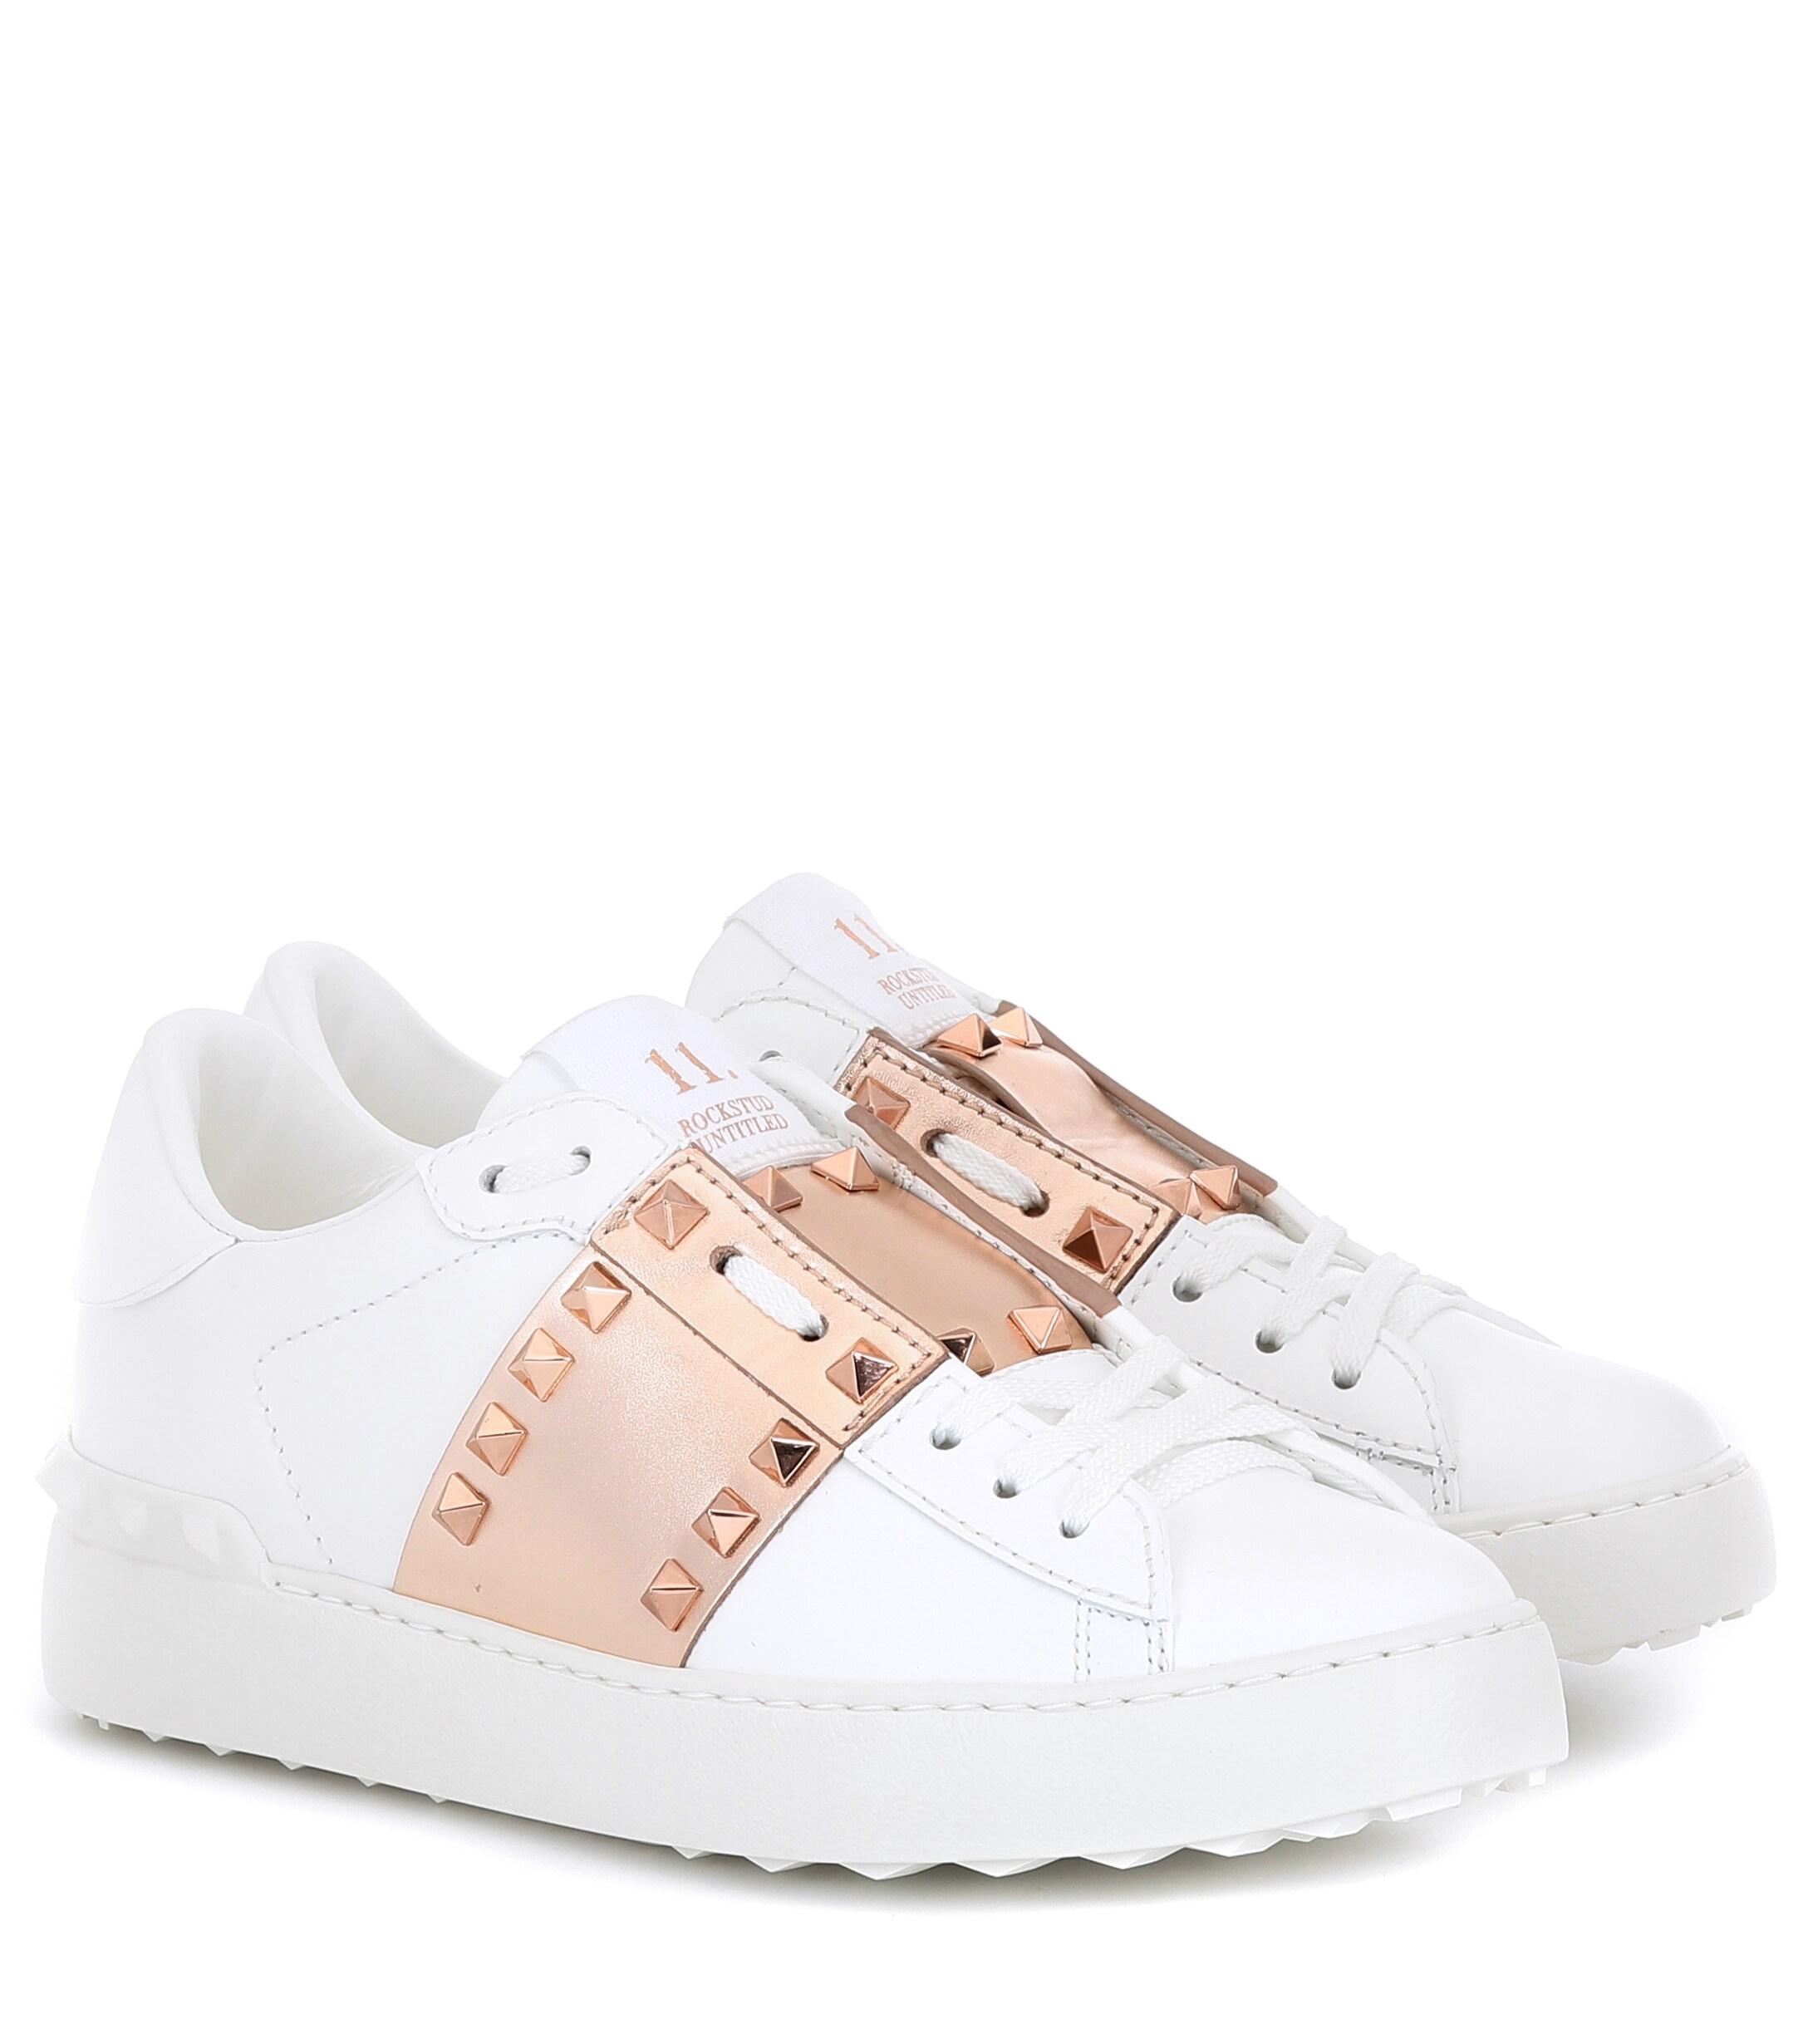 Valentino Rockstud Untitled Leather Sneakers in White - Lyst